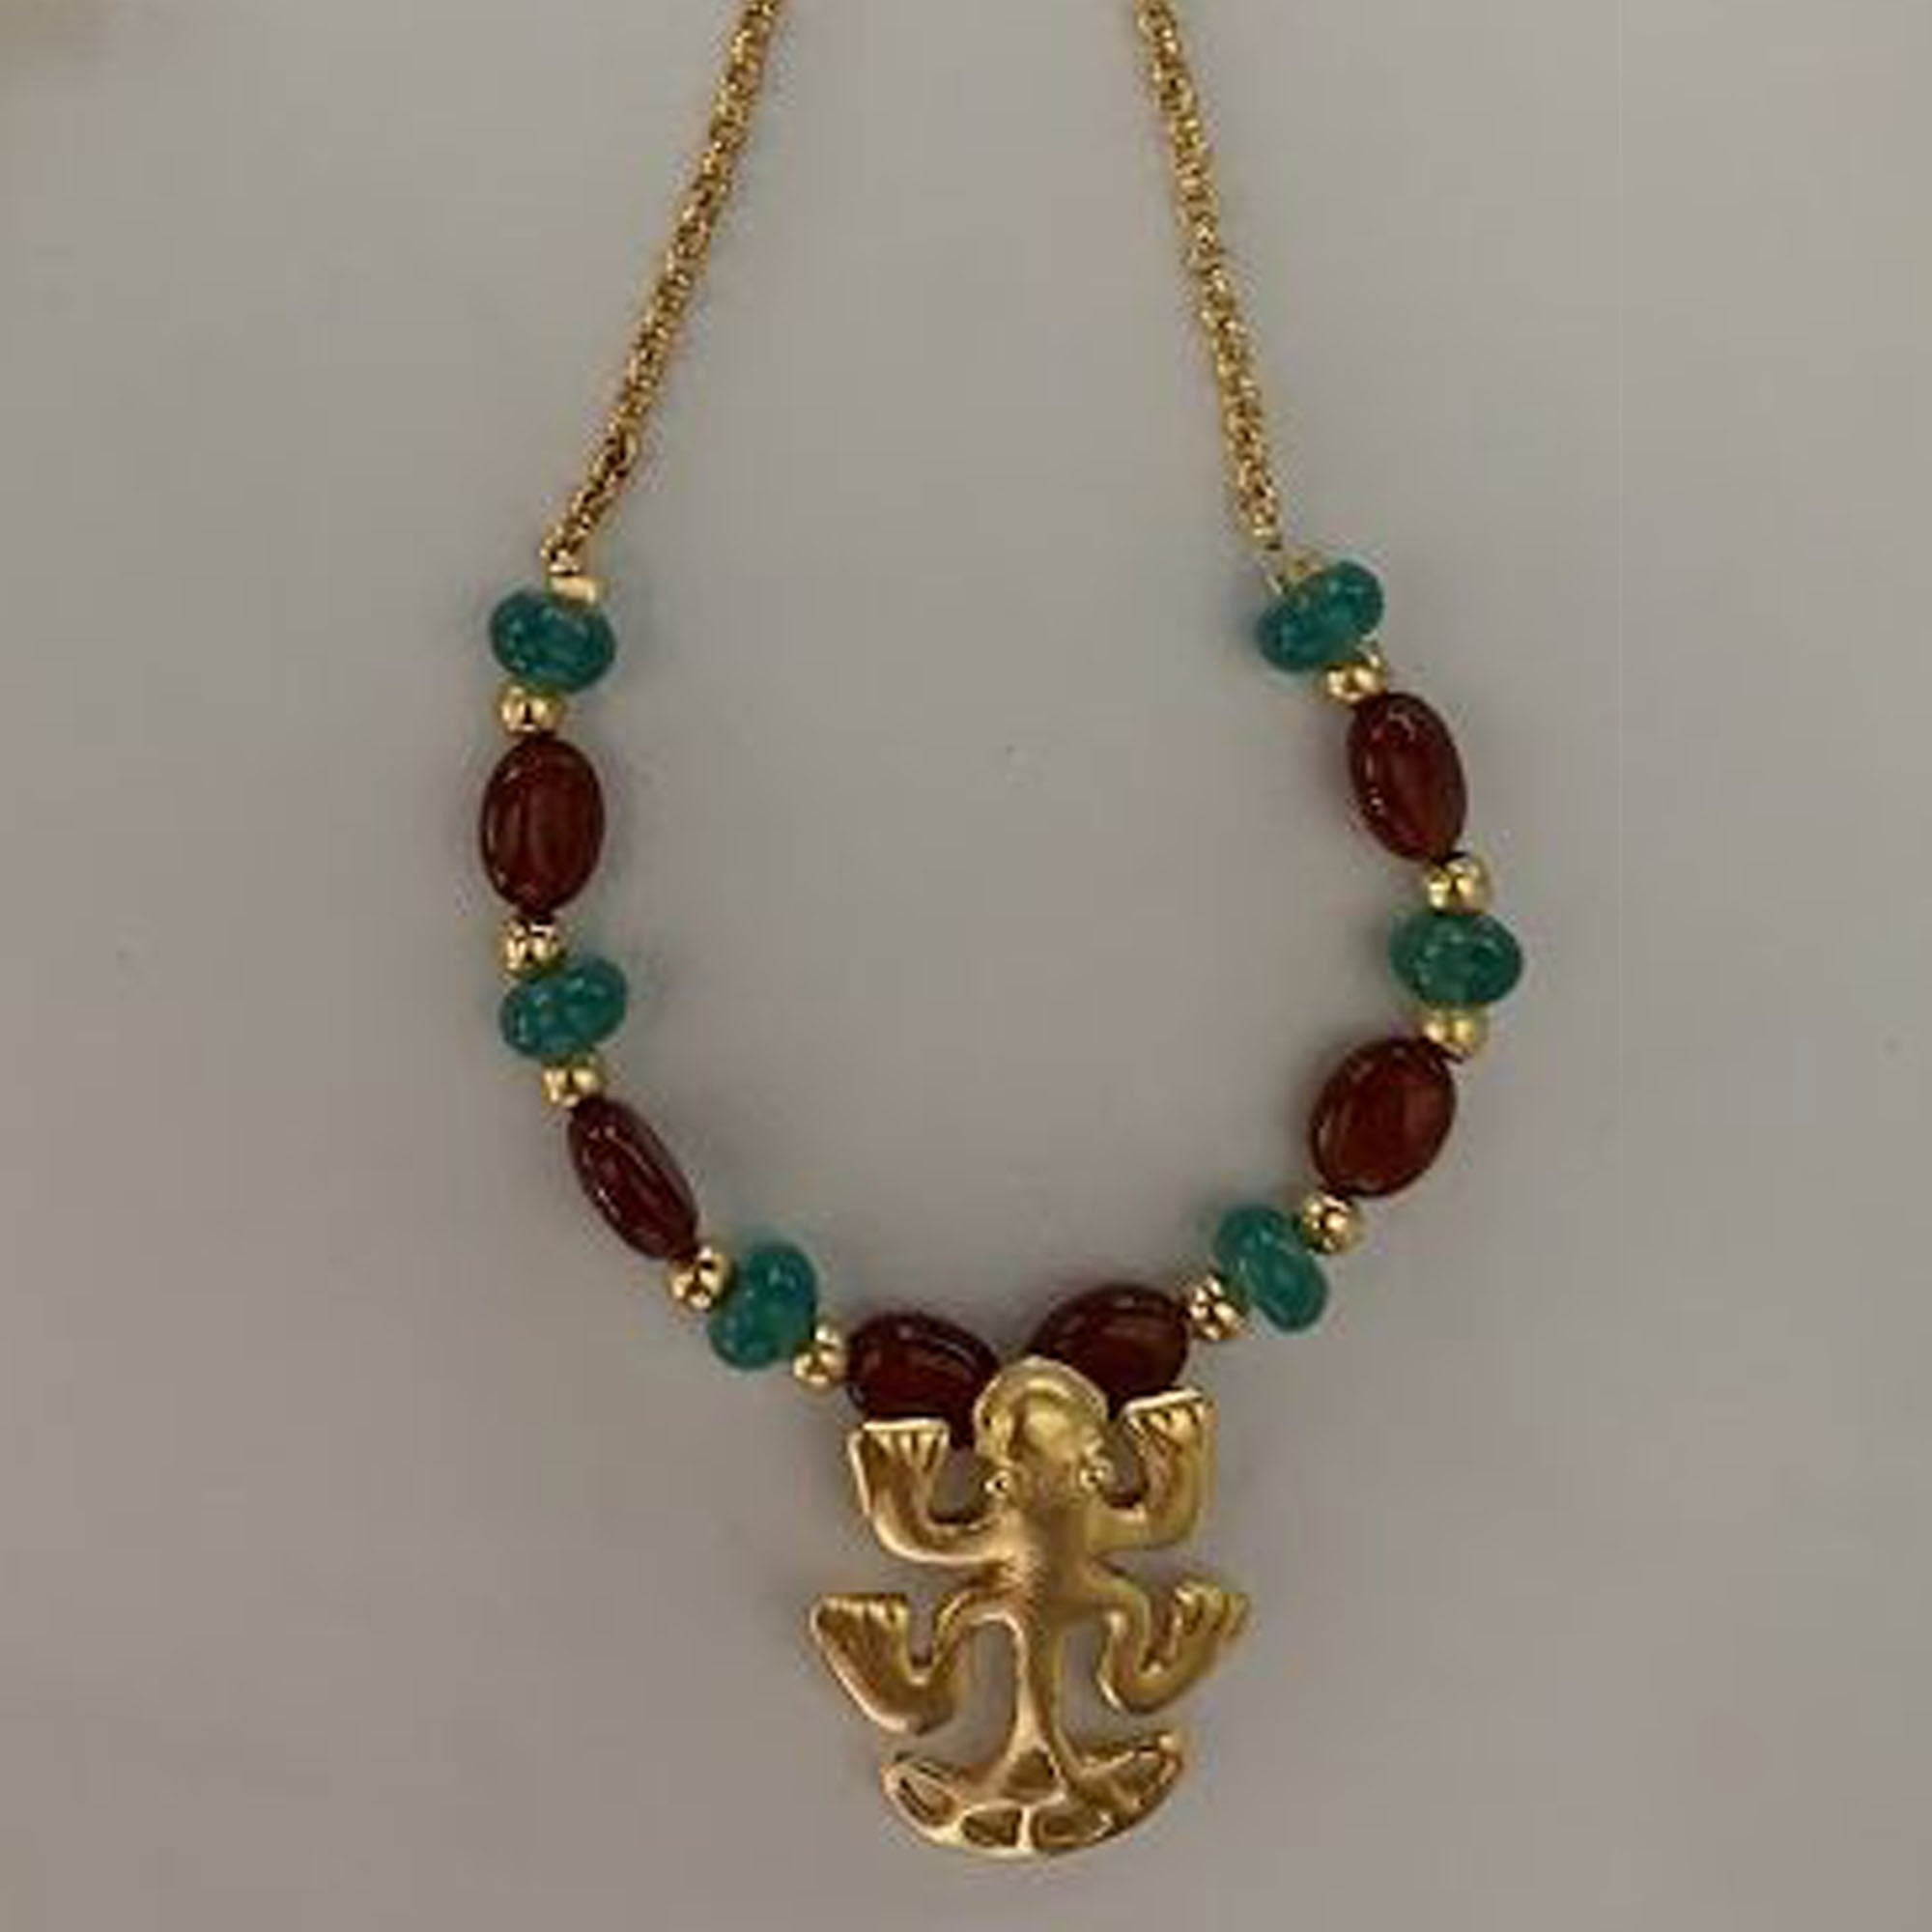 Semiprecious Stones and Frog Necklace